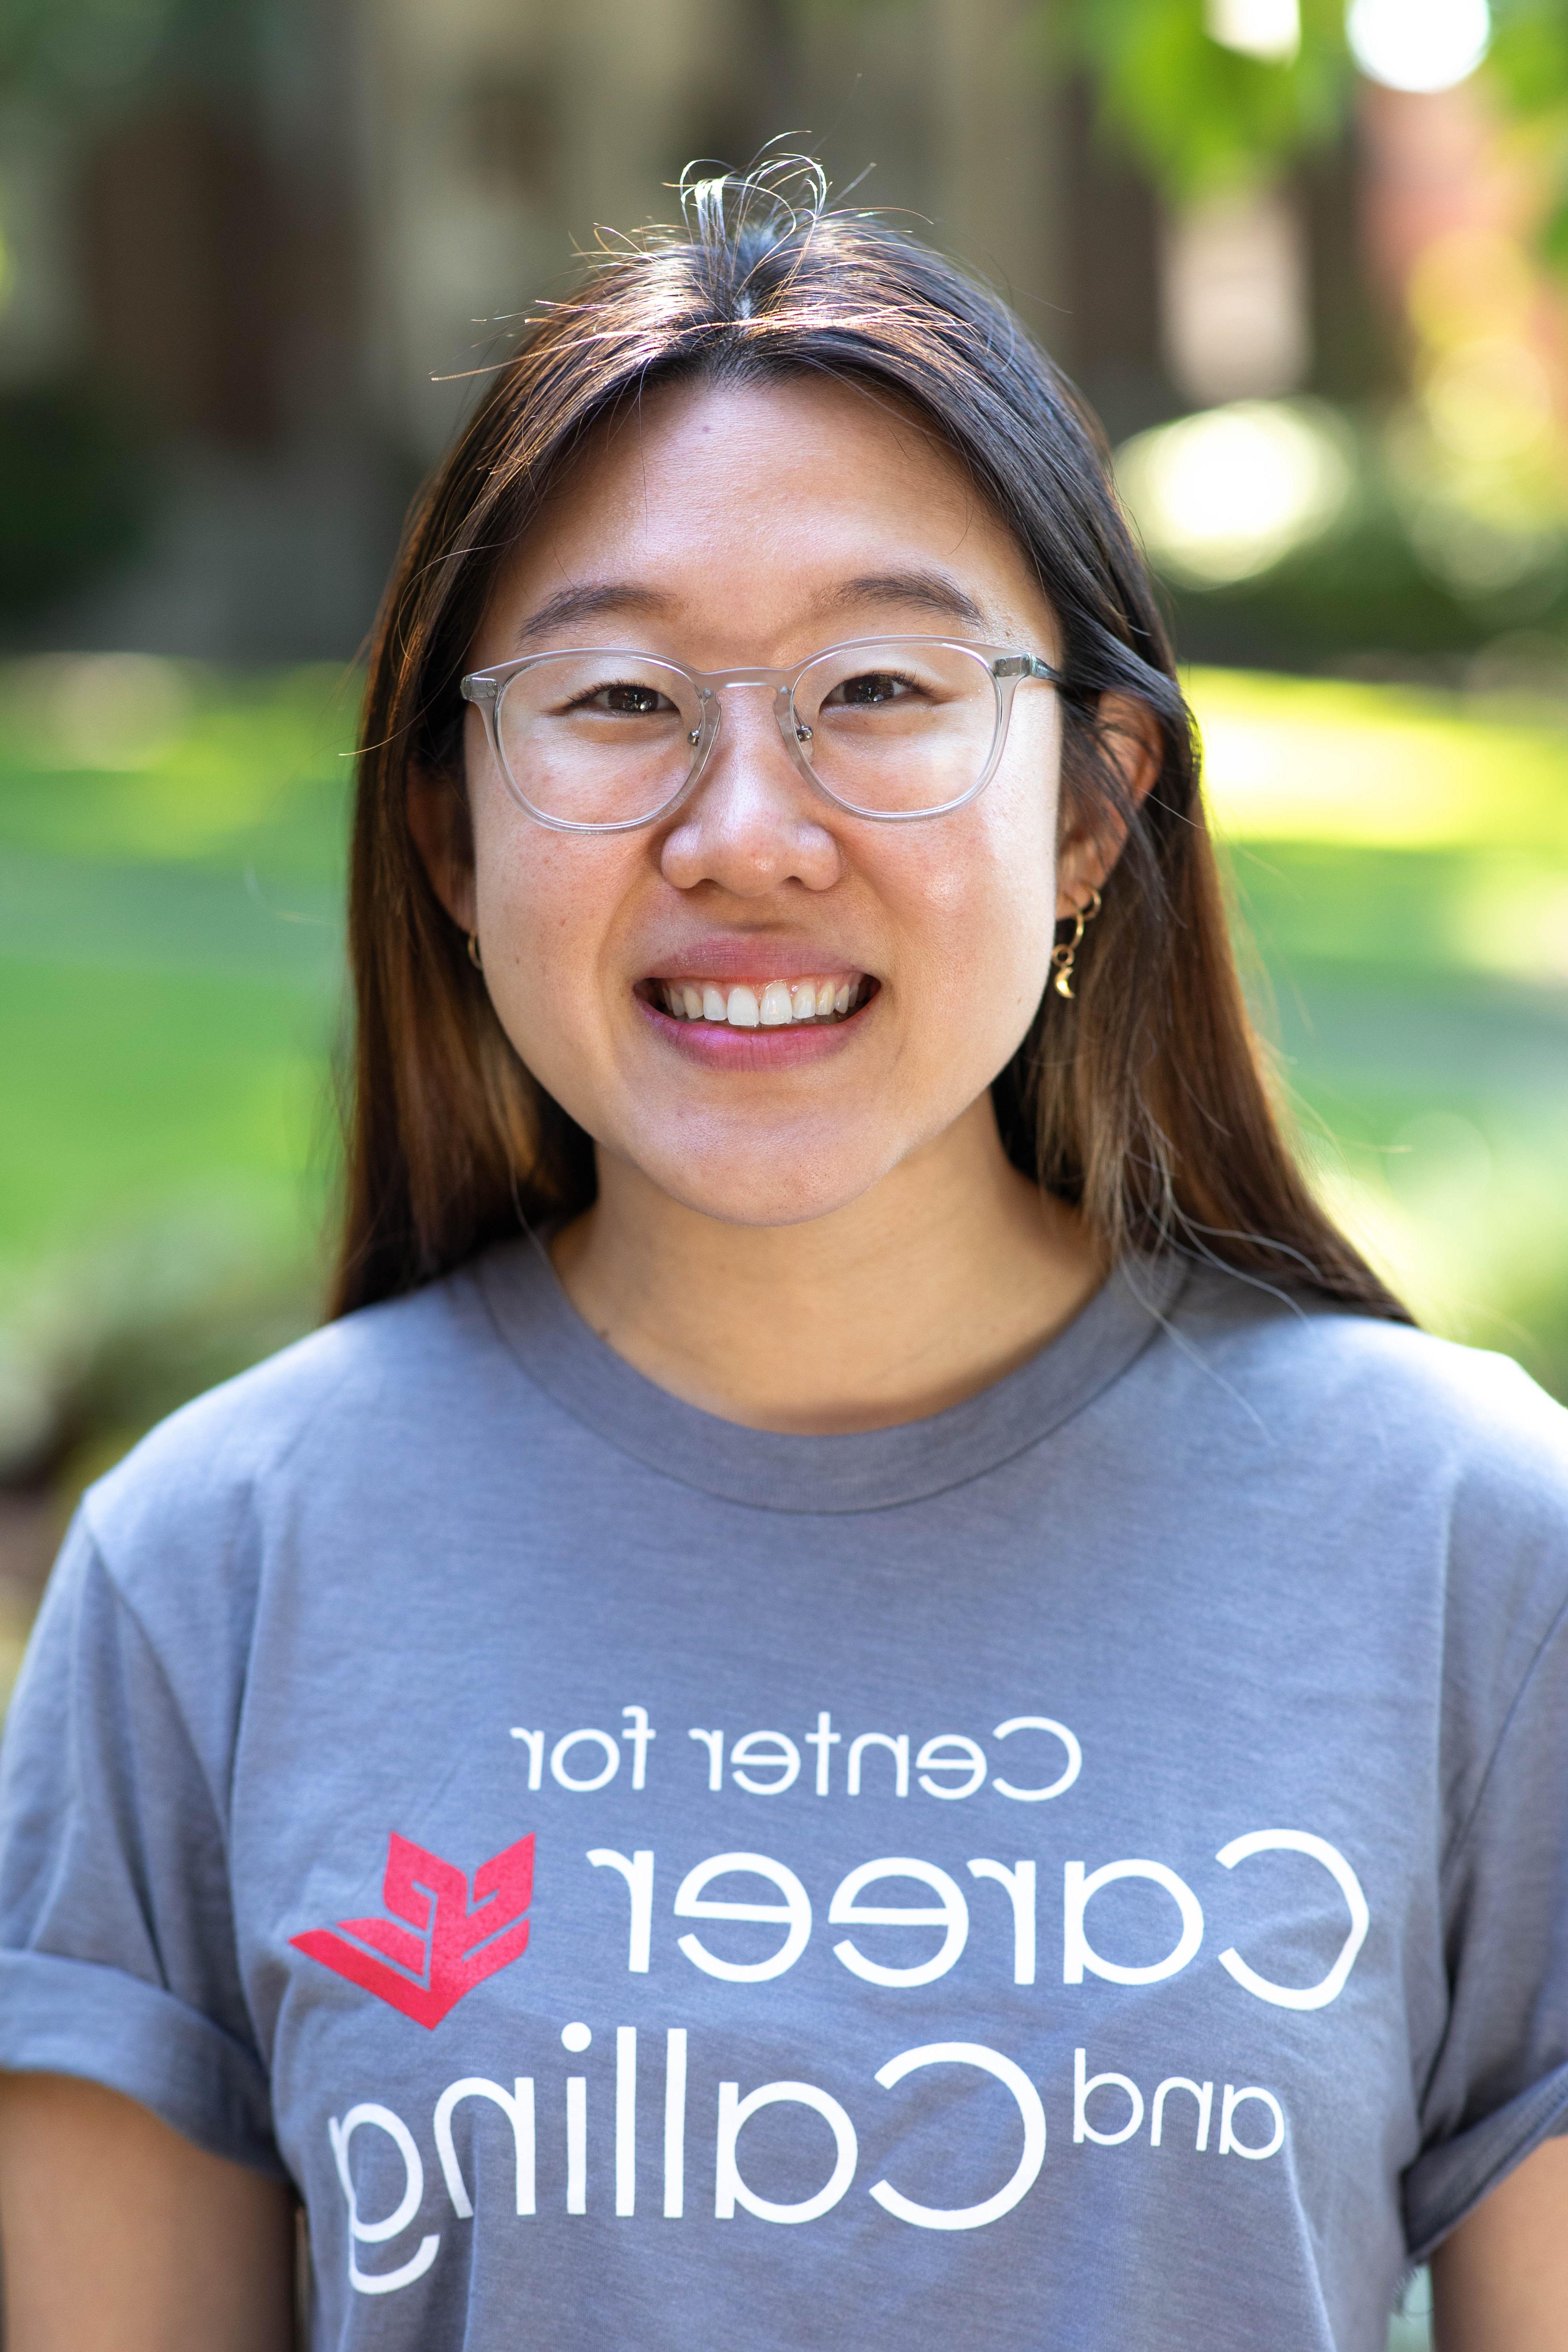 Headshot of Grace Lee, Graduate Career Advisor and GS 3001 professor for the Center for Career and Calling.